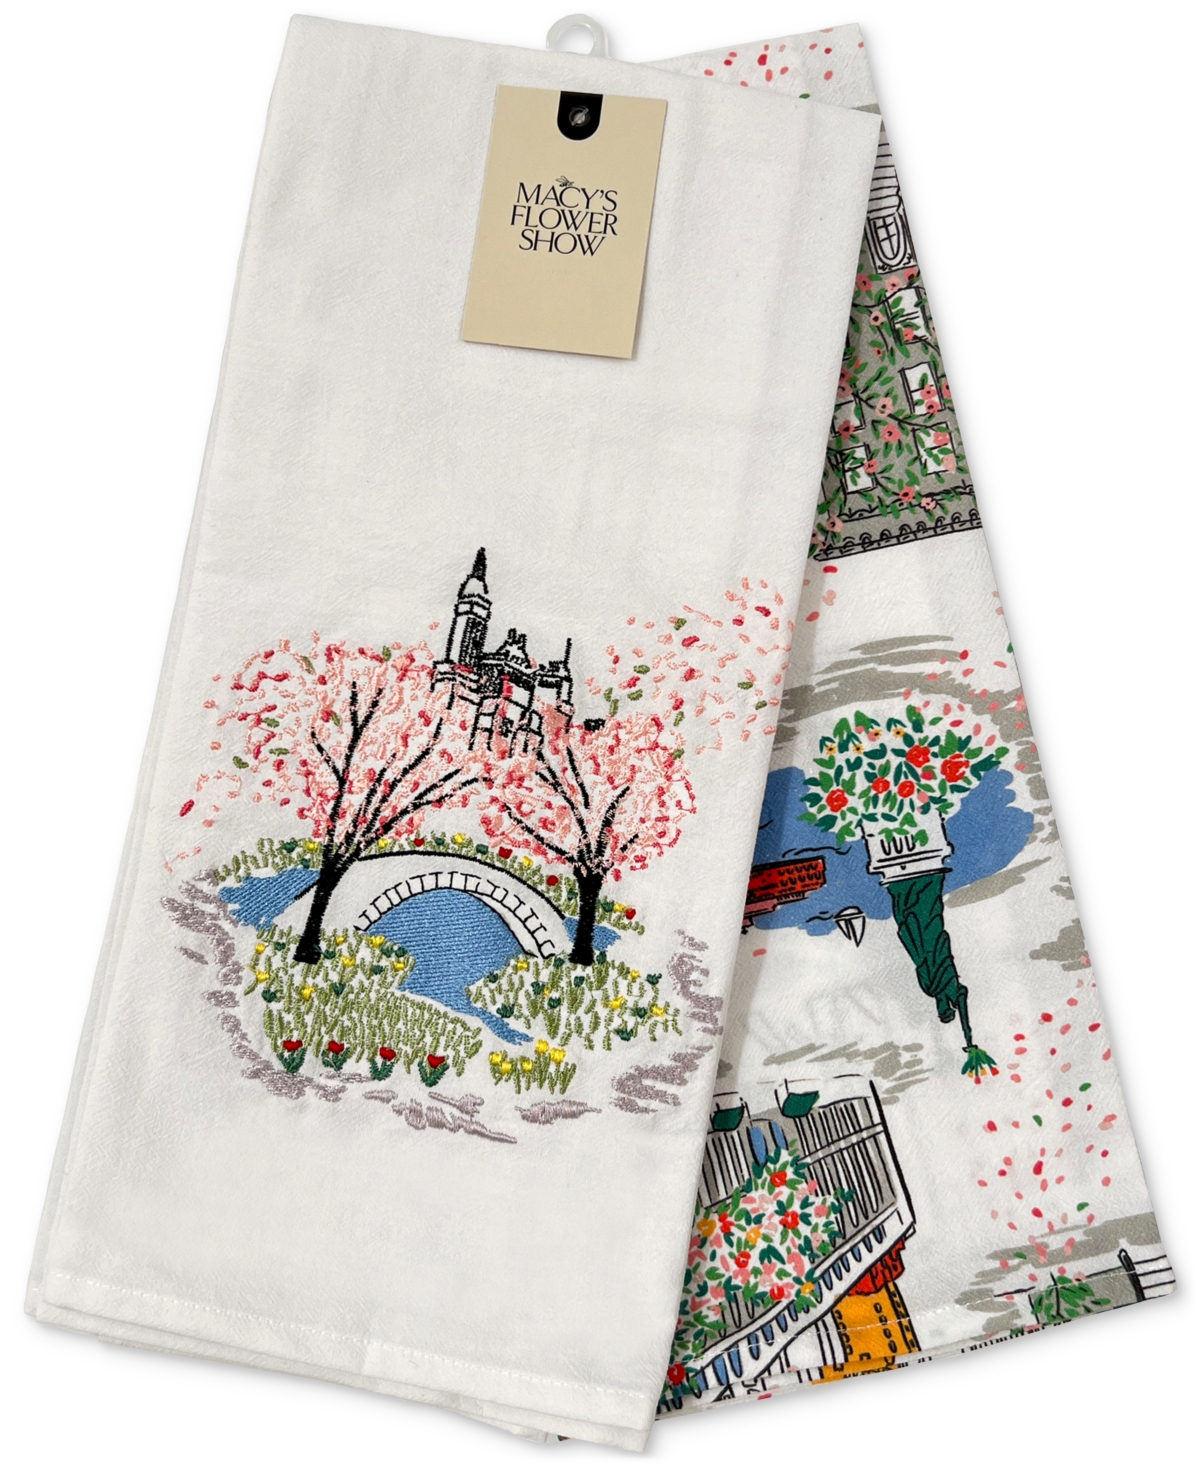 Flower Show Flour Sack Kitchen Towel 2-Pack Set, 30" x 30", Created for Macy's - NYC Scenic